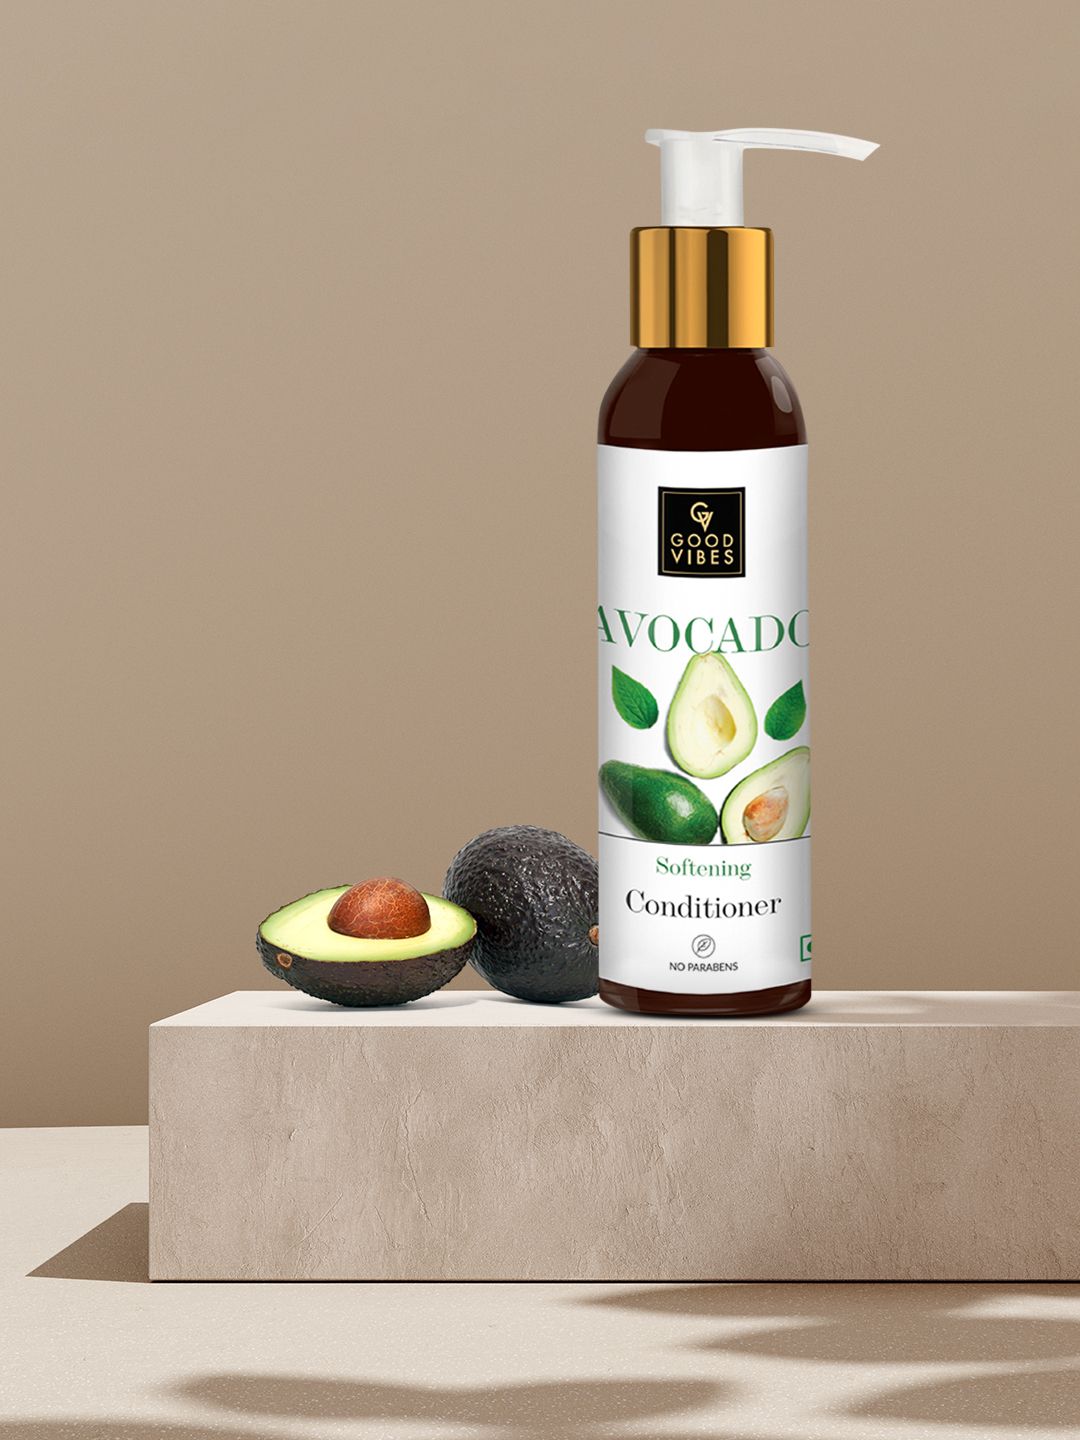 Good Vibes Avocado Softening Hair Conditioner - 120 ml Price in India